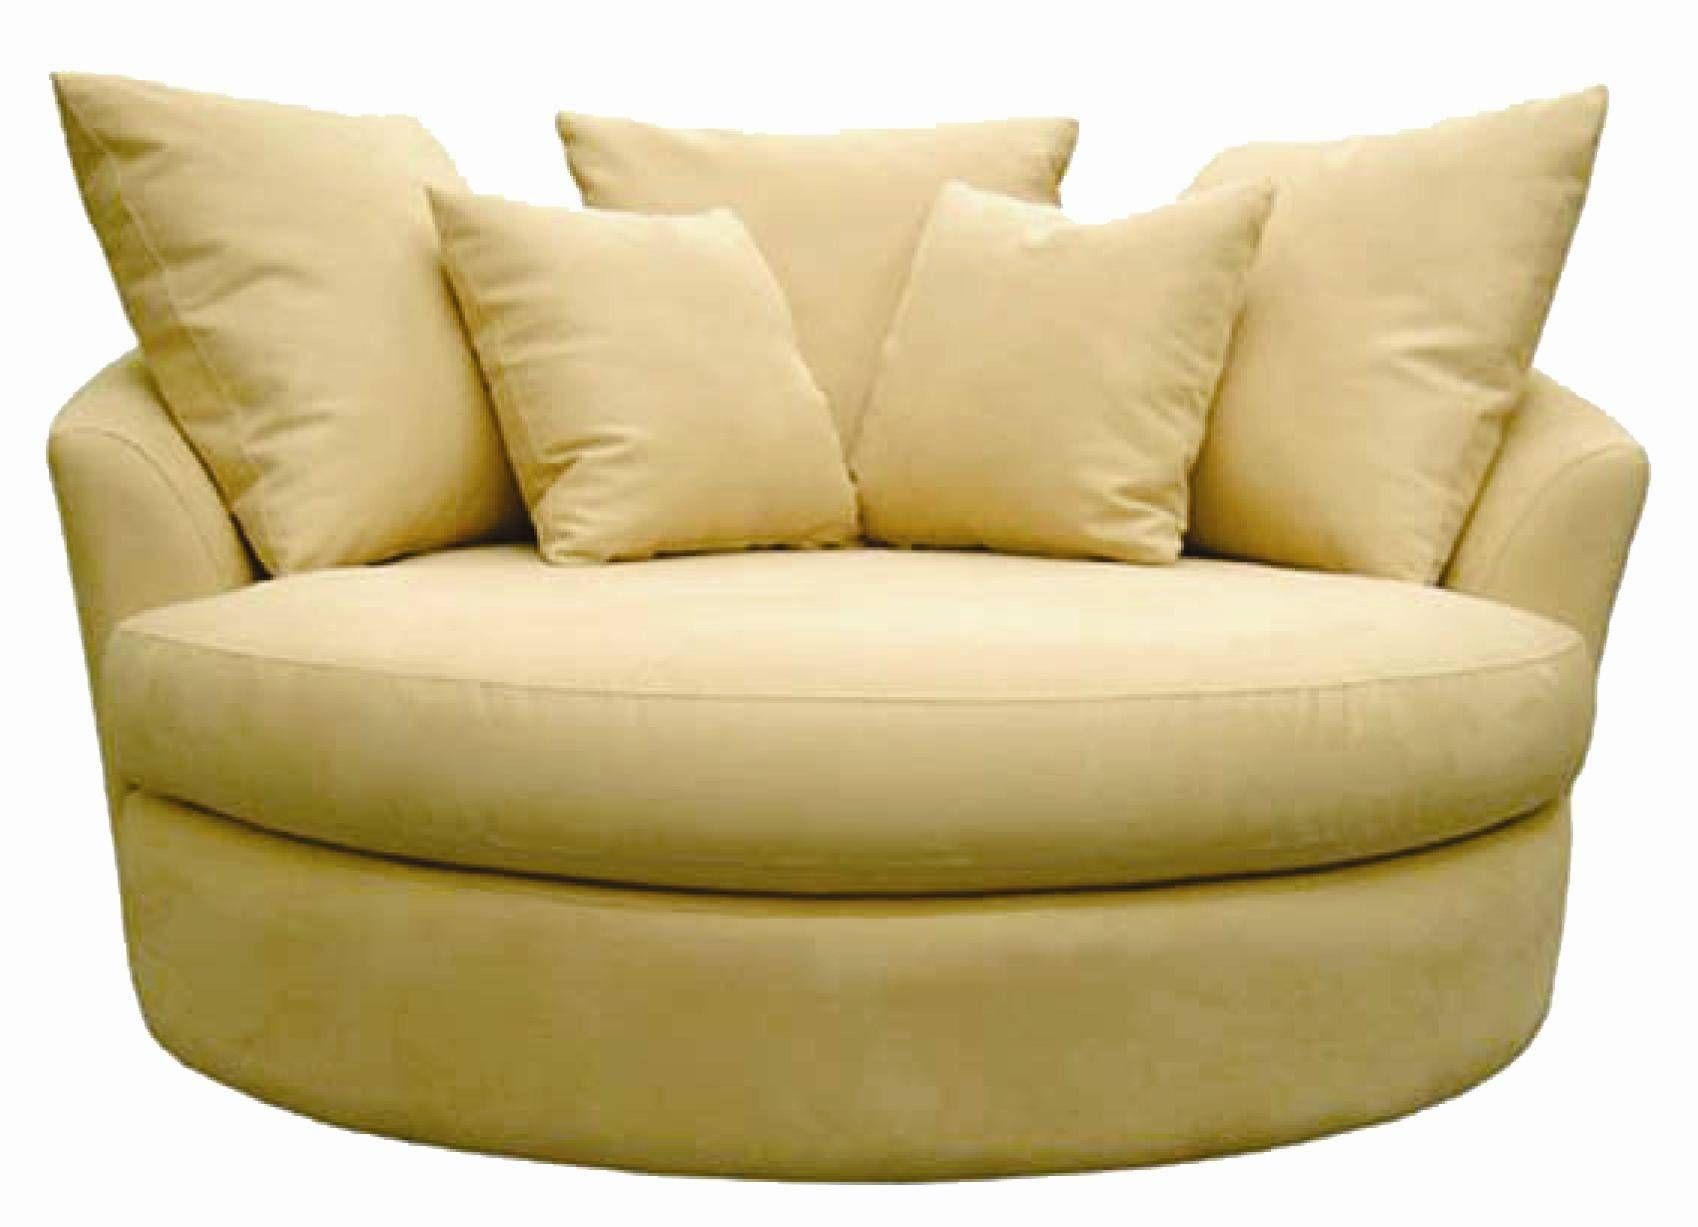 Round Sofa Chair Covers | Tehranmix Decoration Throughout Round Swivel Sofa Chairs (View 6 of 30)